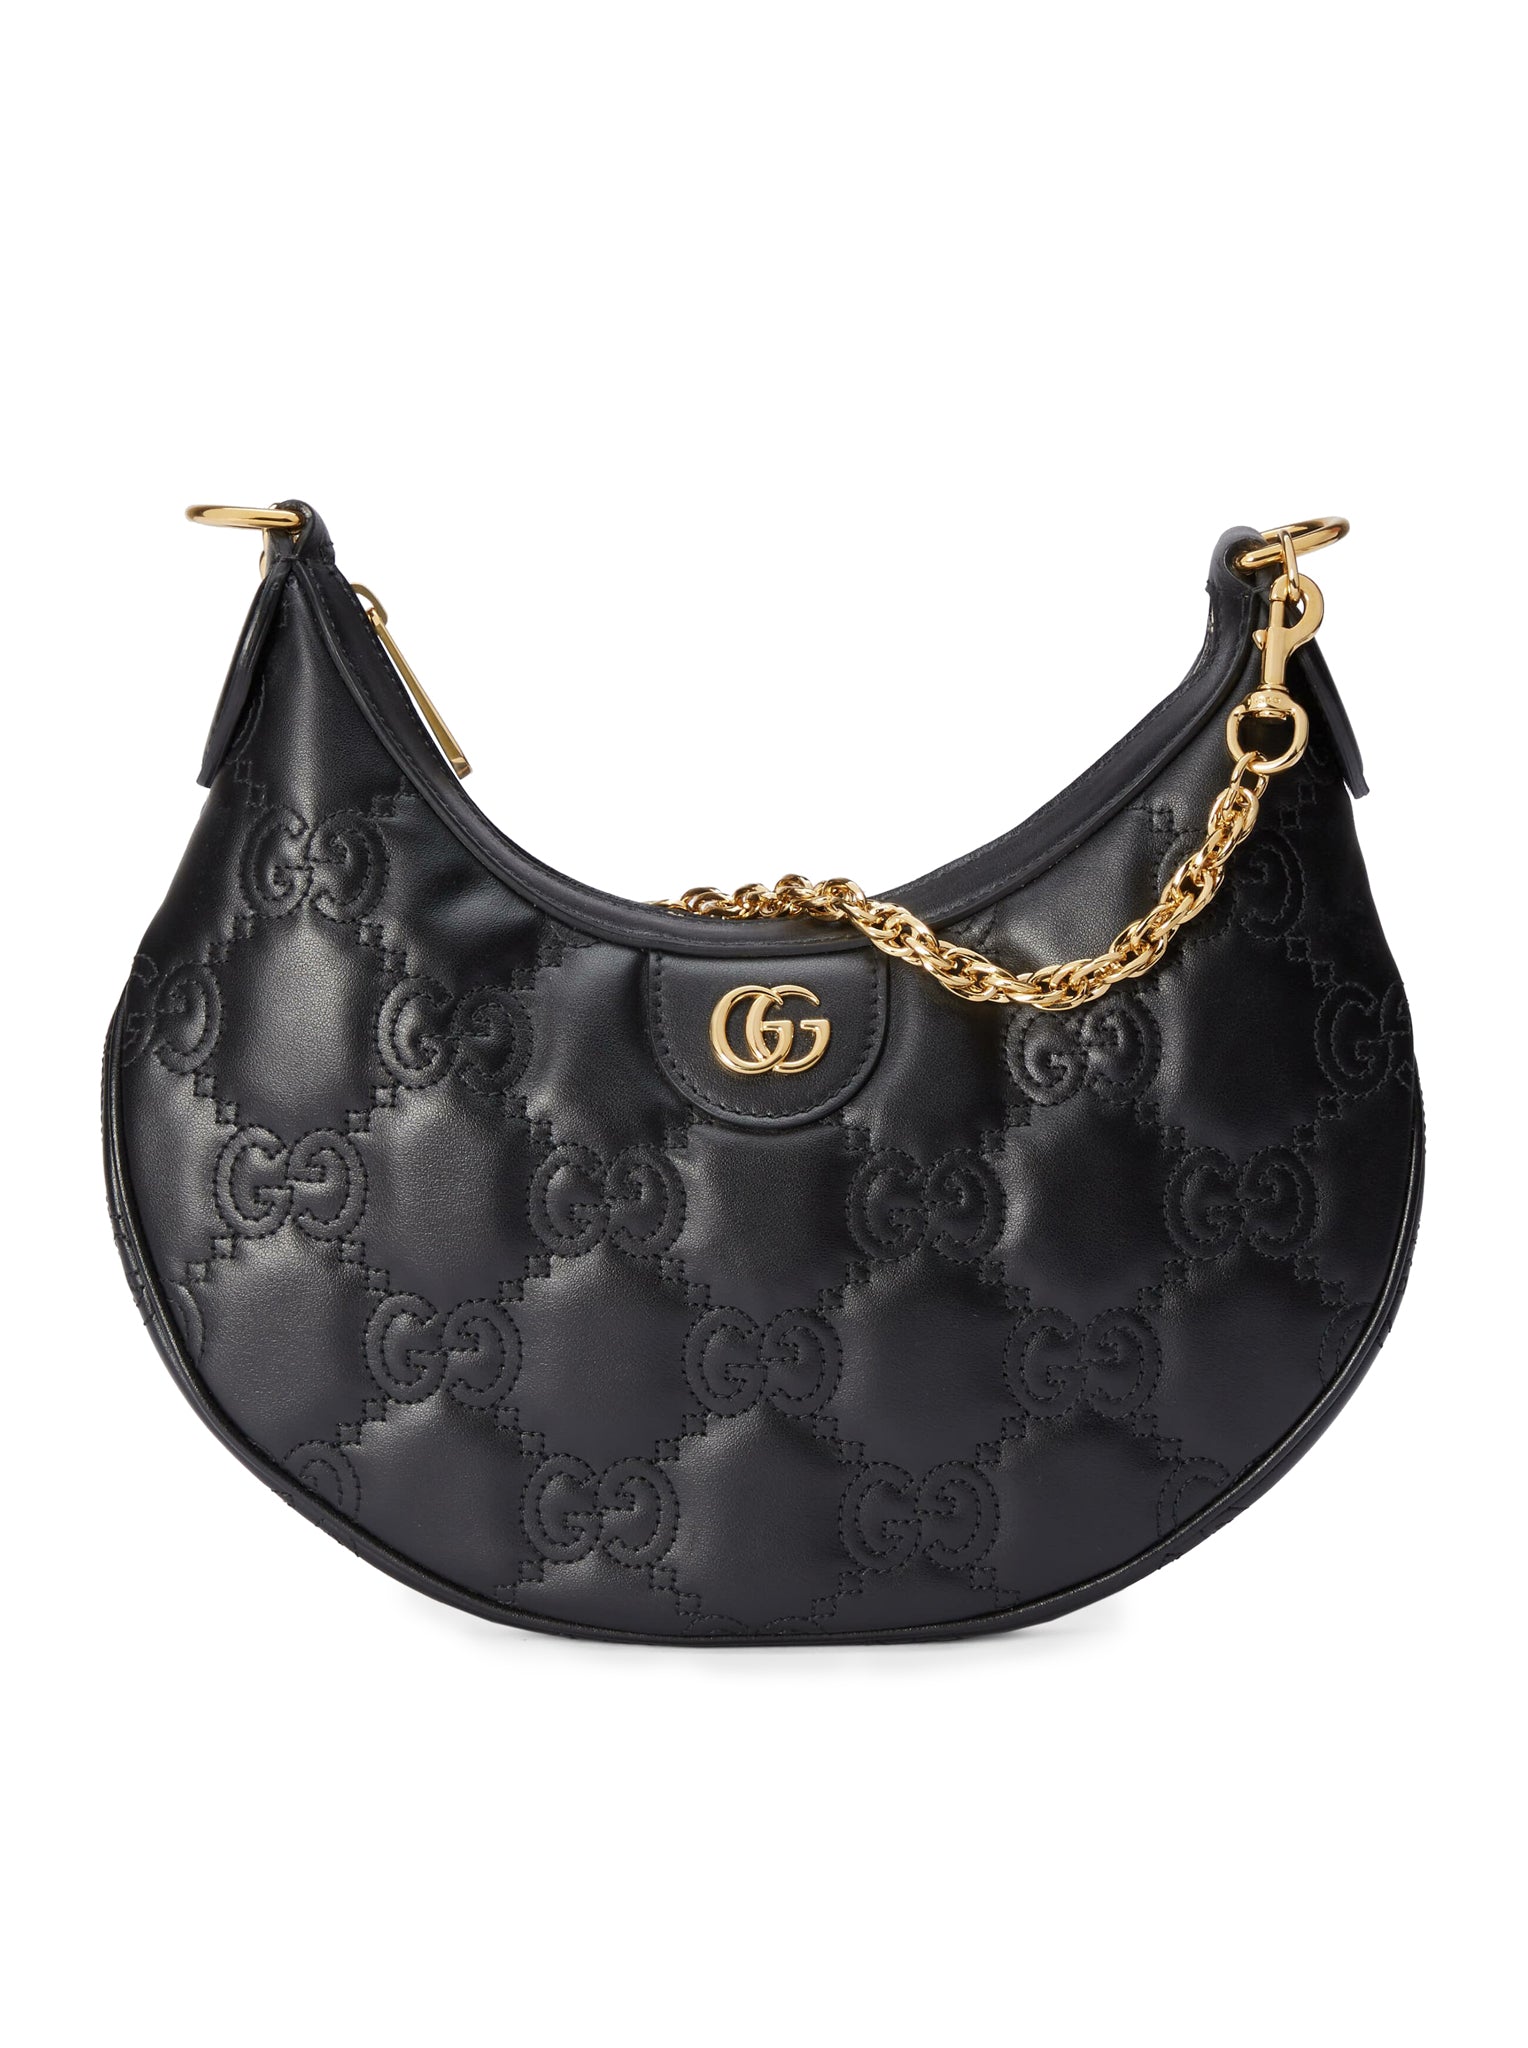 SMALL SIZE SHOULDER BAG IN MATELASSÉ LEATHER WITH GG